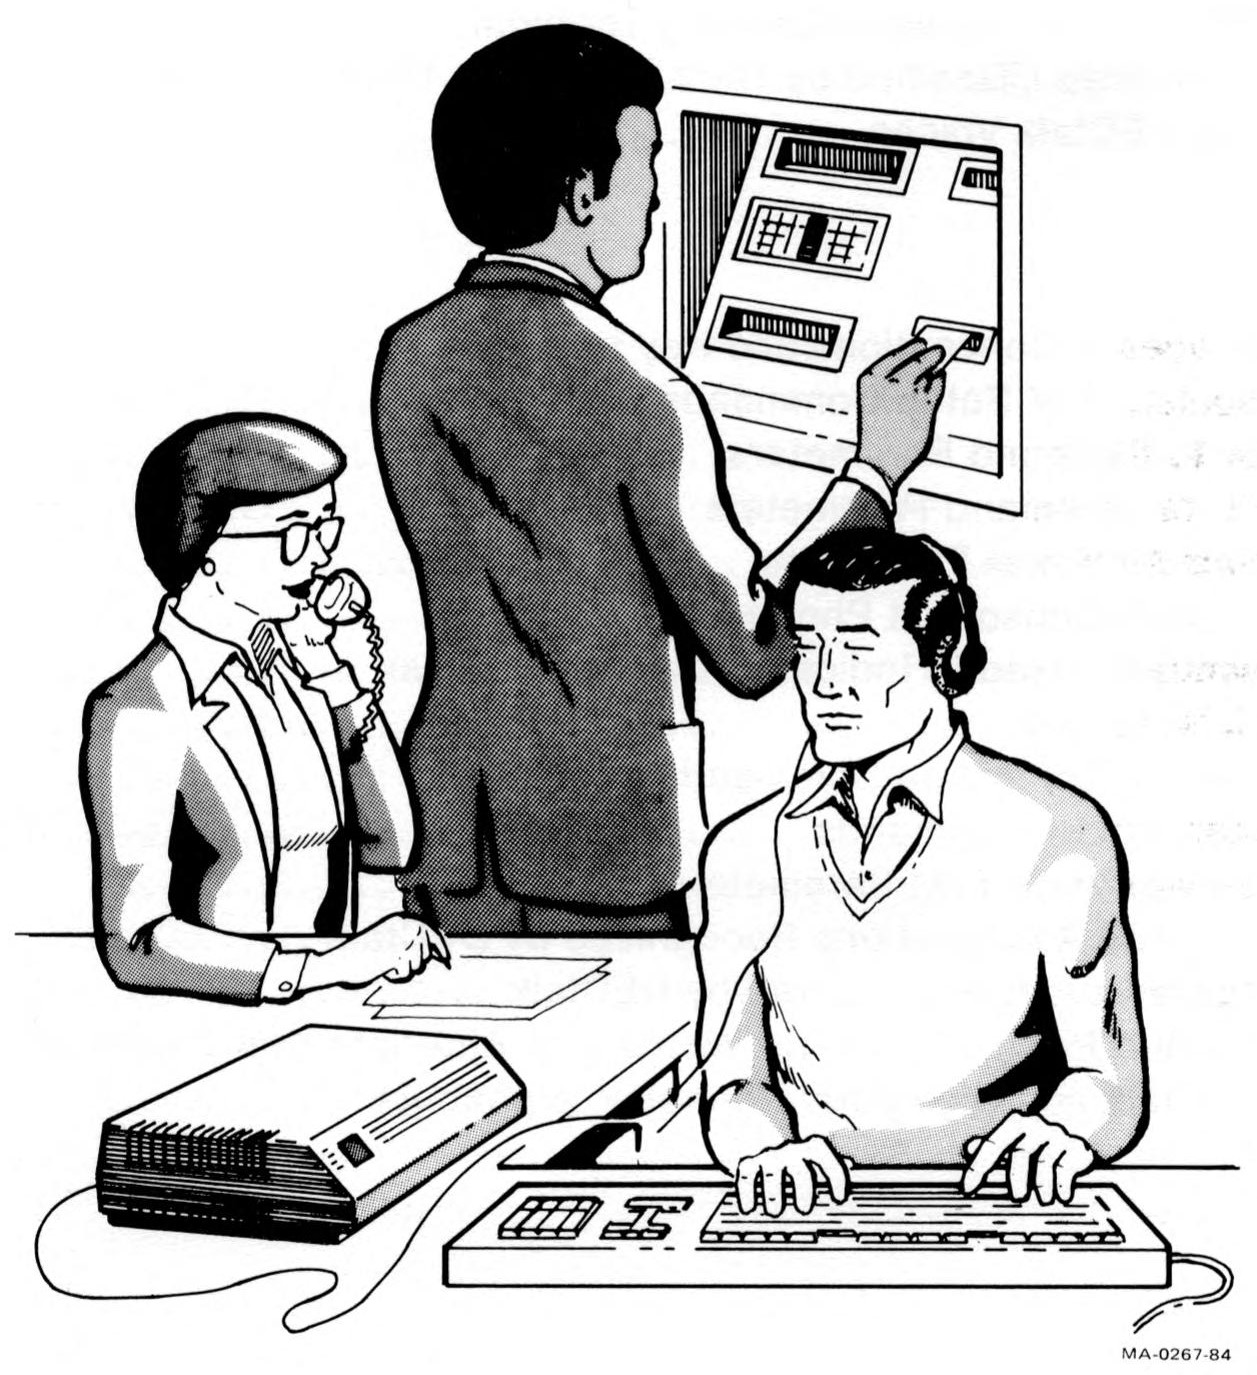 An illustration from the 1984 DECtalk manual showing three people: one interacting with a wall terminal, another making a phone call with a corded receiver, and another typing on a large keyboard connected to a screenless computer.